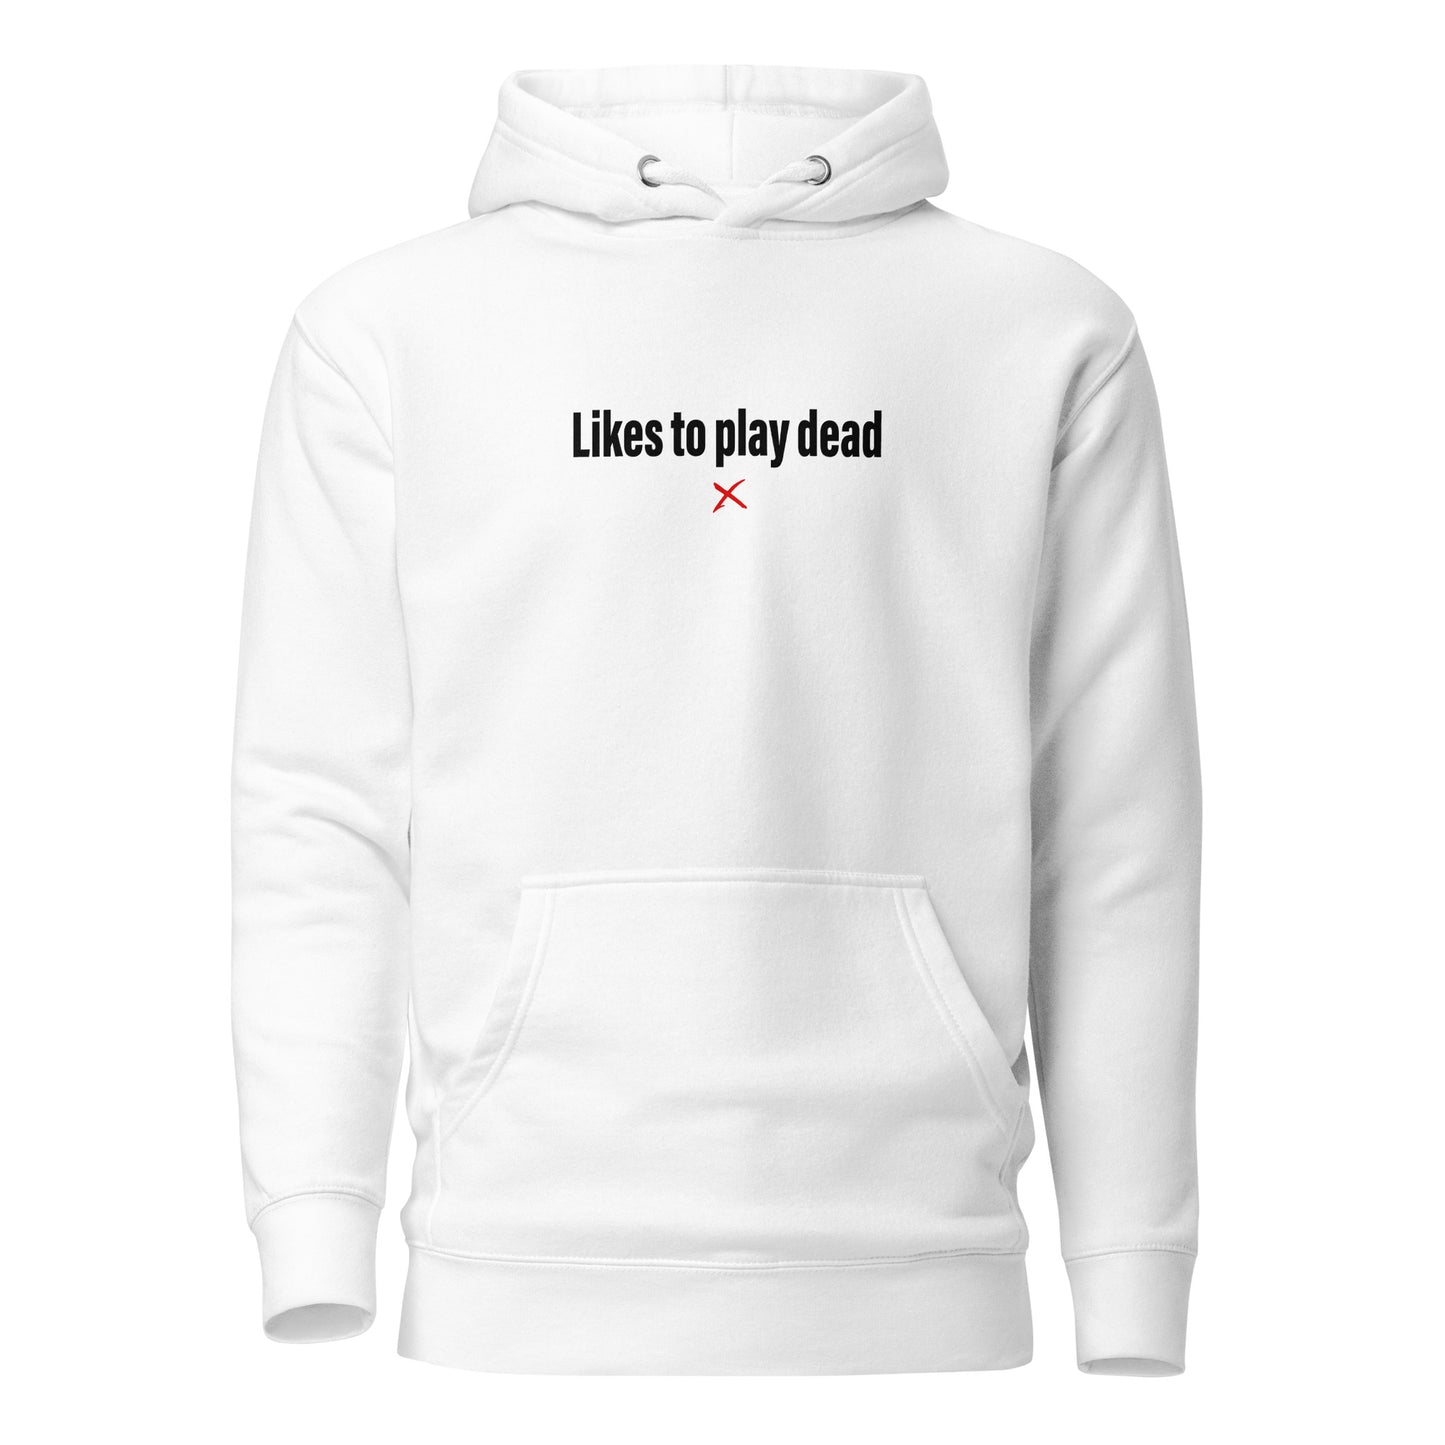 Likes to play dead - Hoodie